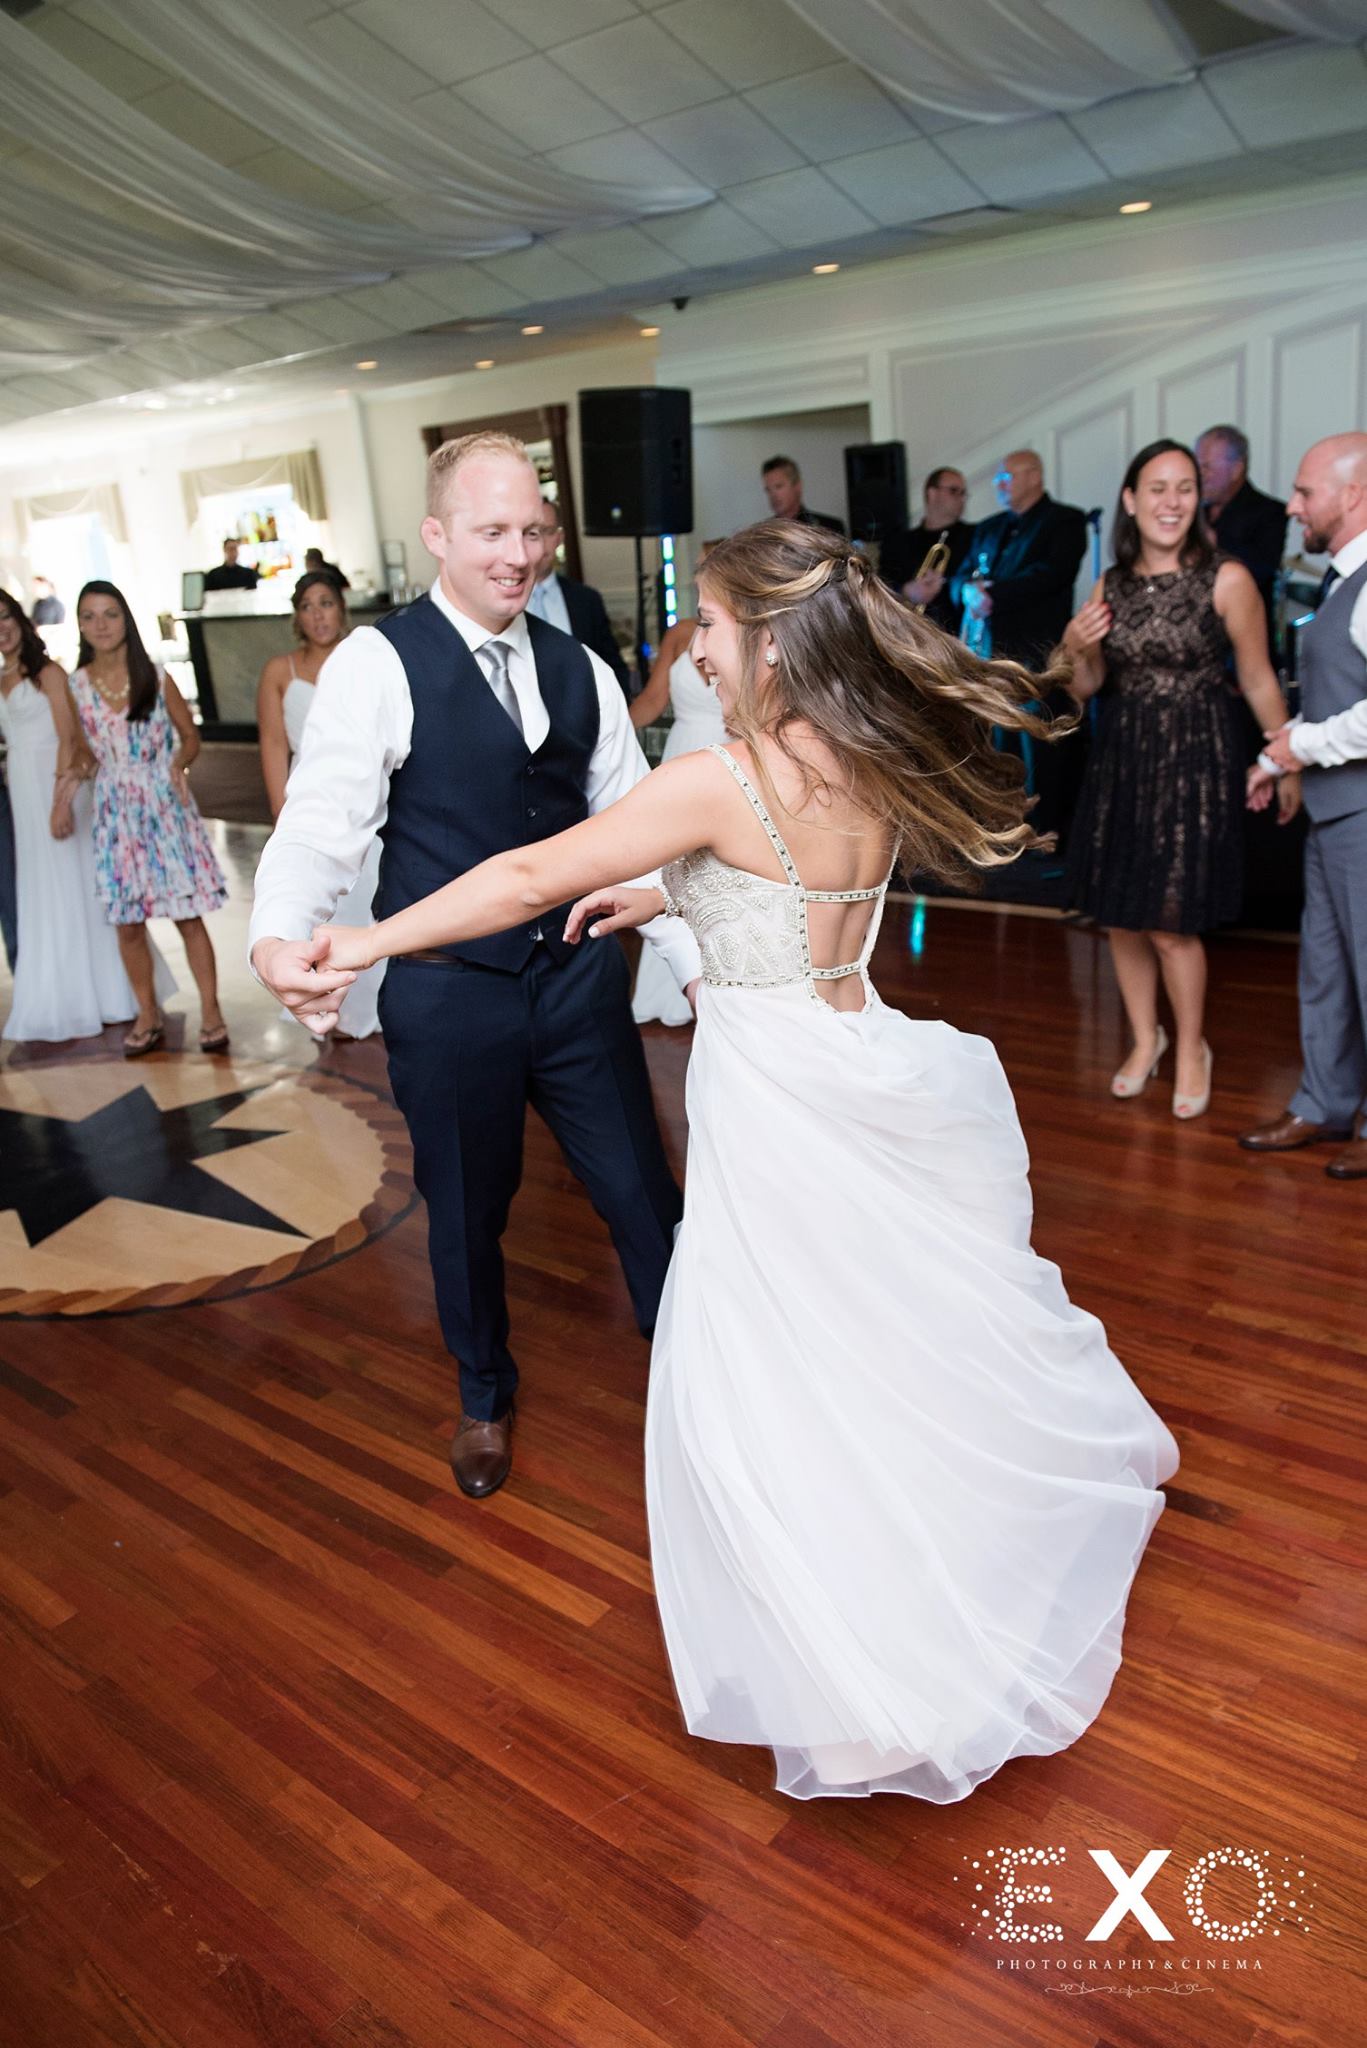 bride and groom dancing at reception